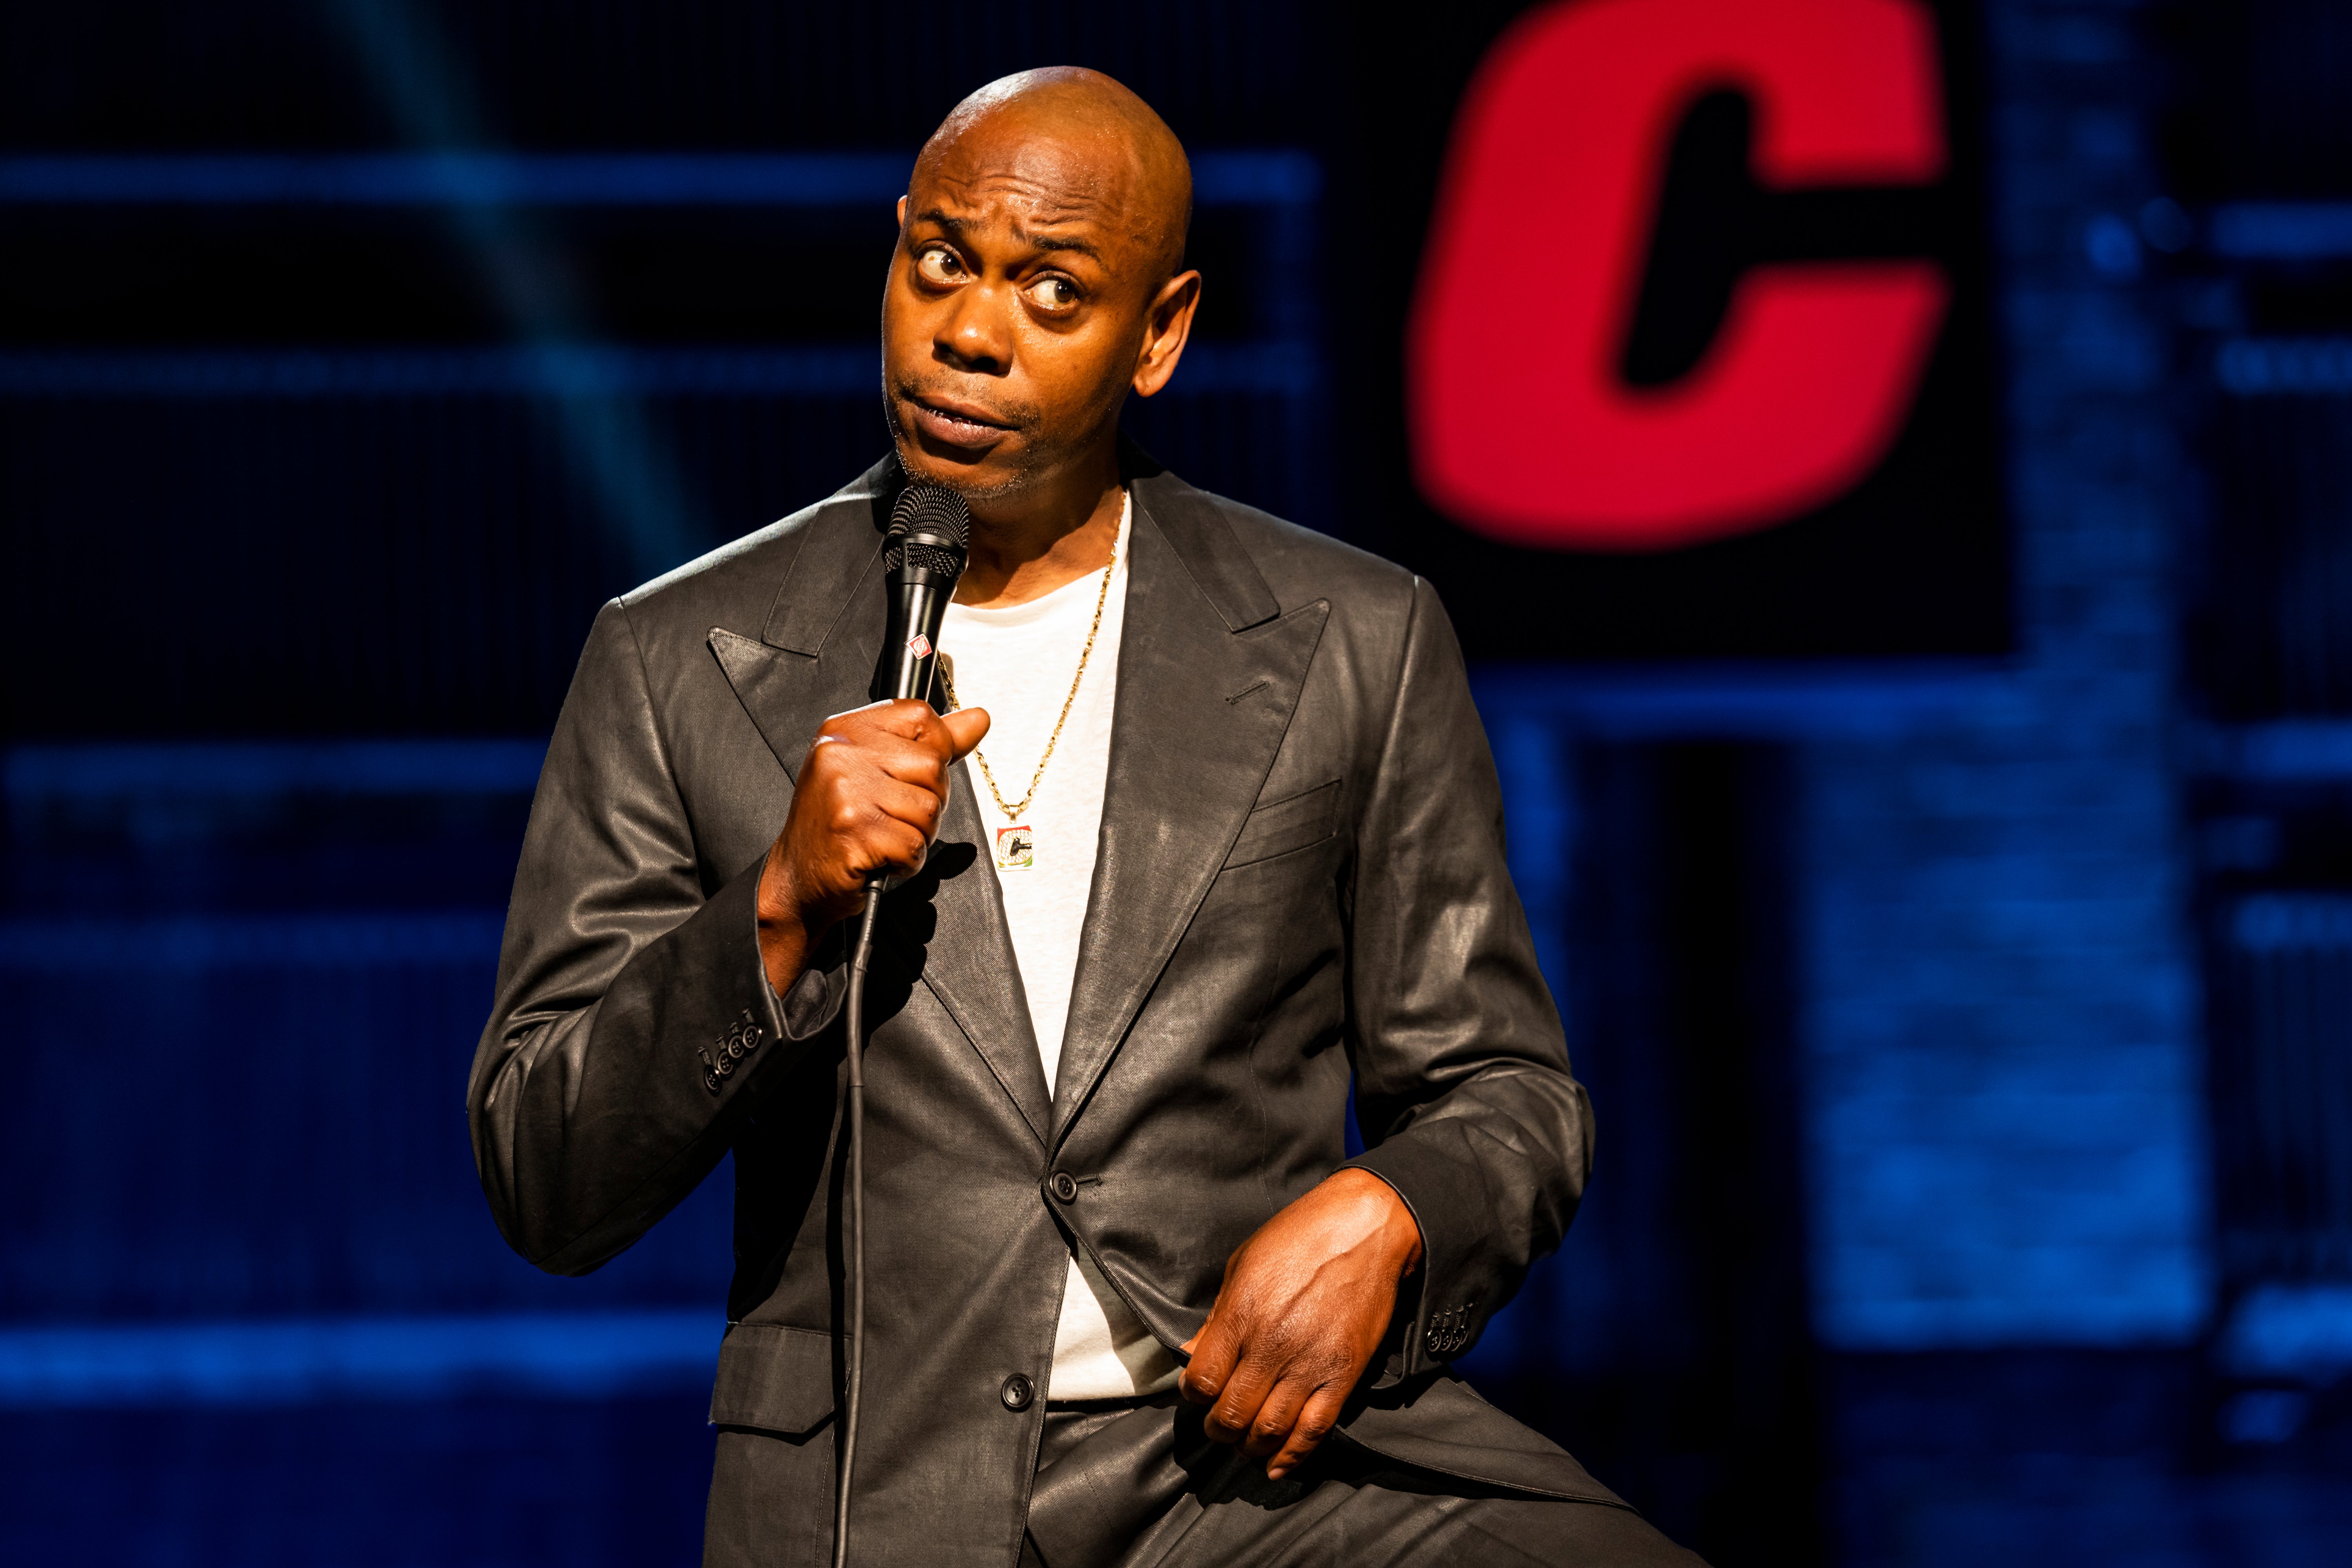 Dave Chappelle makes surprise appearance at local Liverpool comedy club The Independent